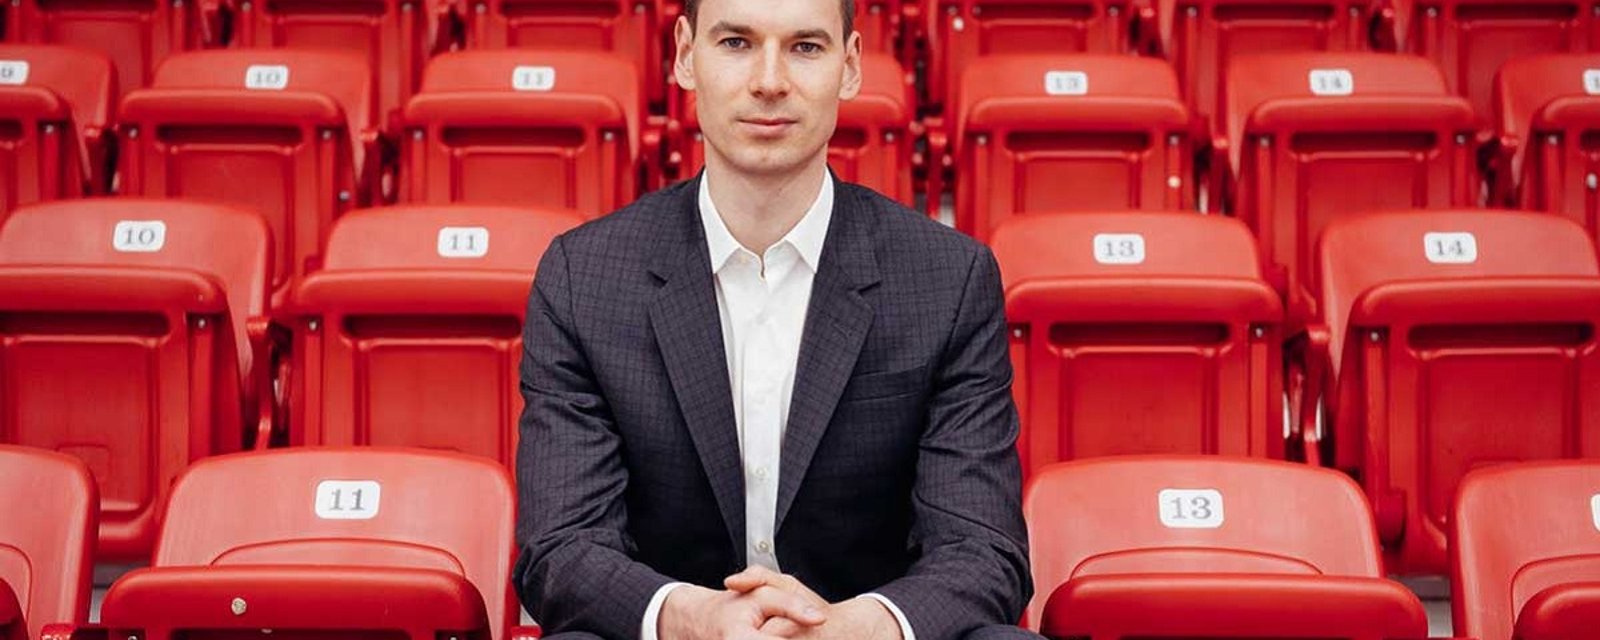 Chayka accused of being a “liar and a quitter” as things turn ugly in Arizona.